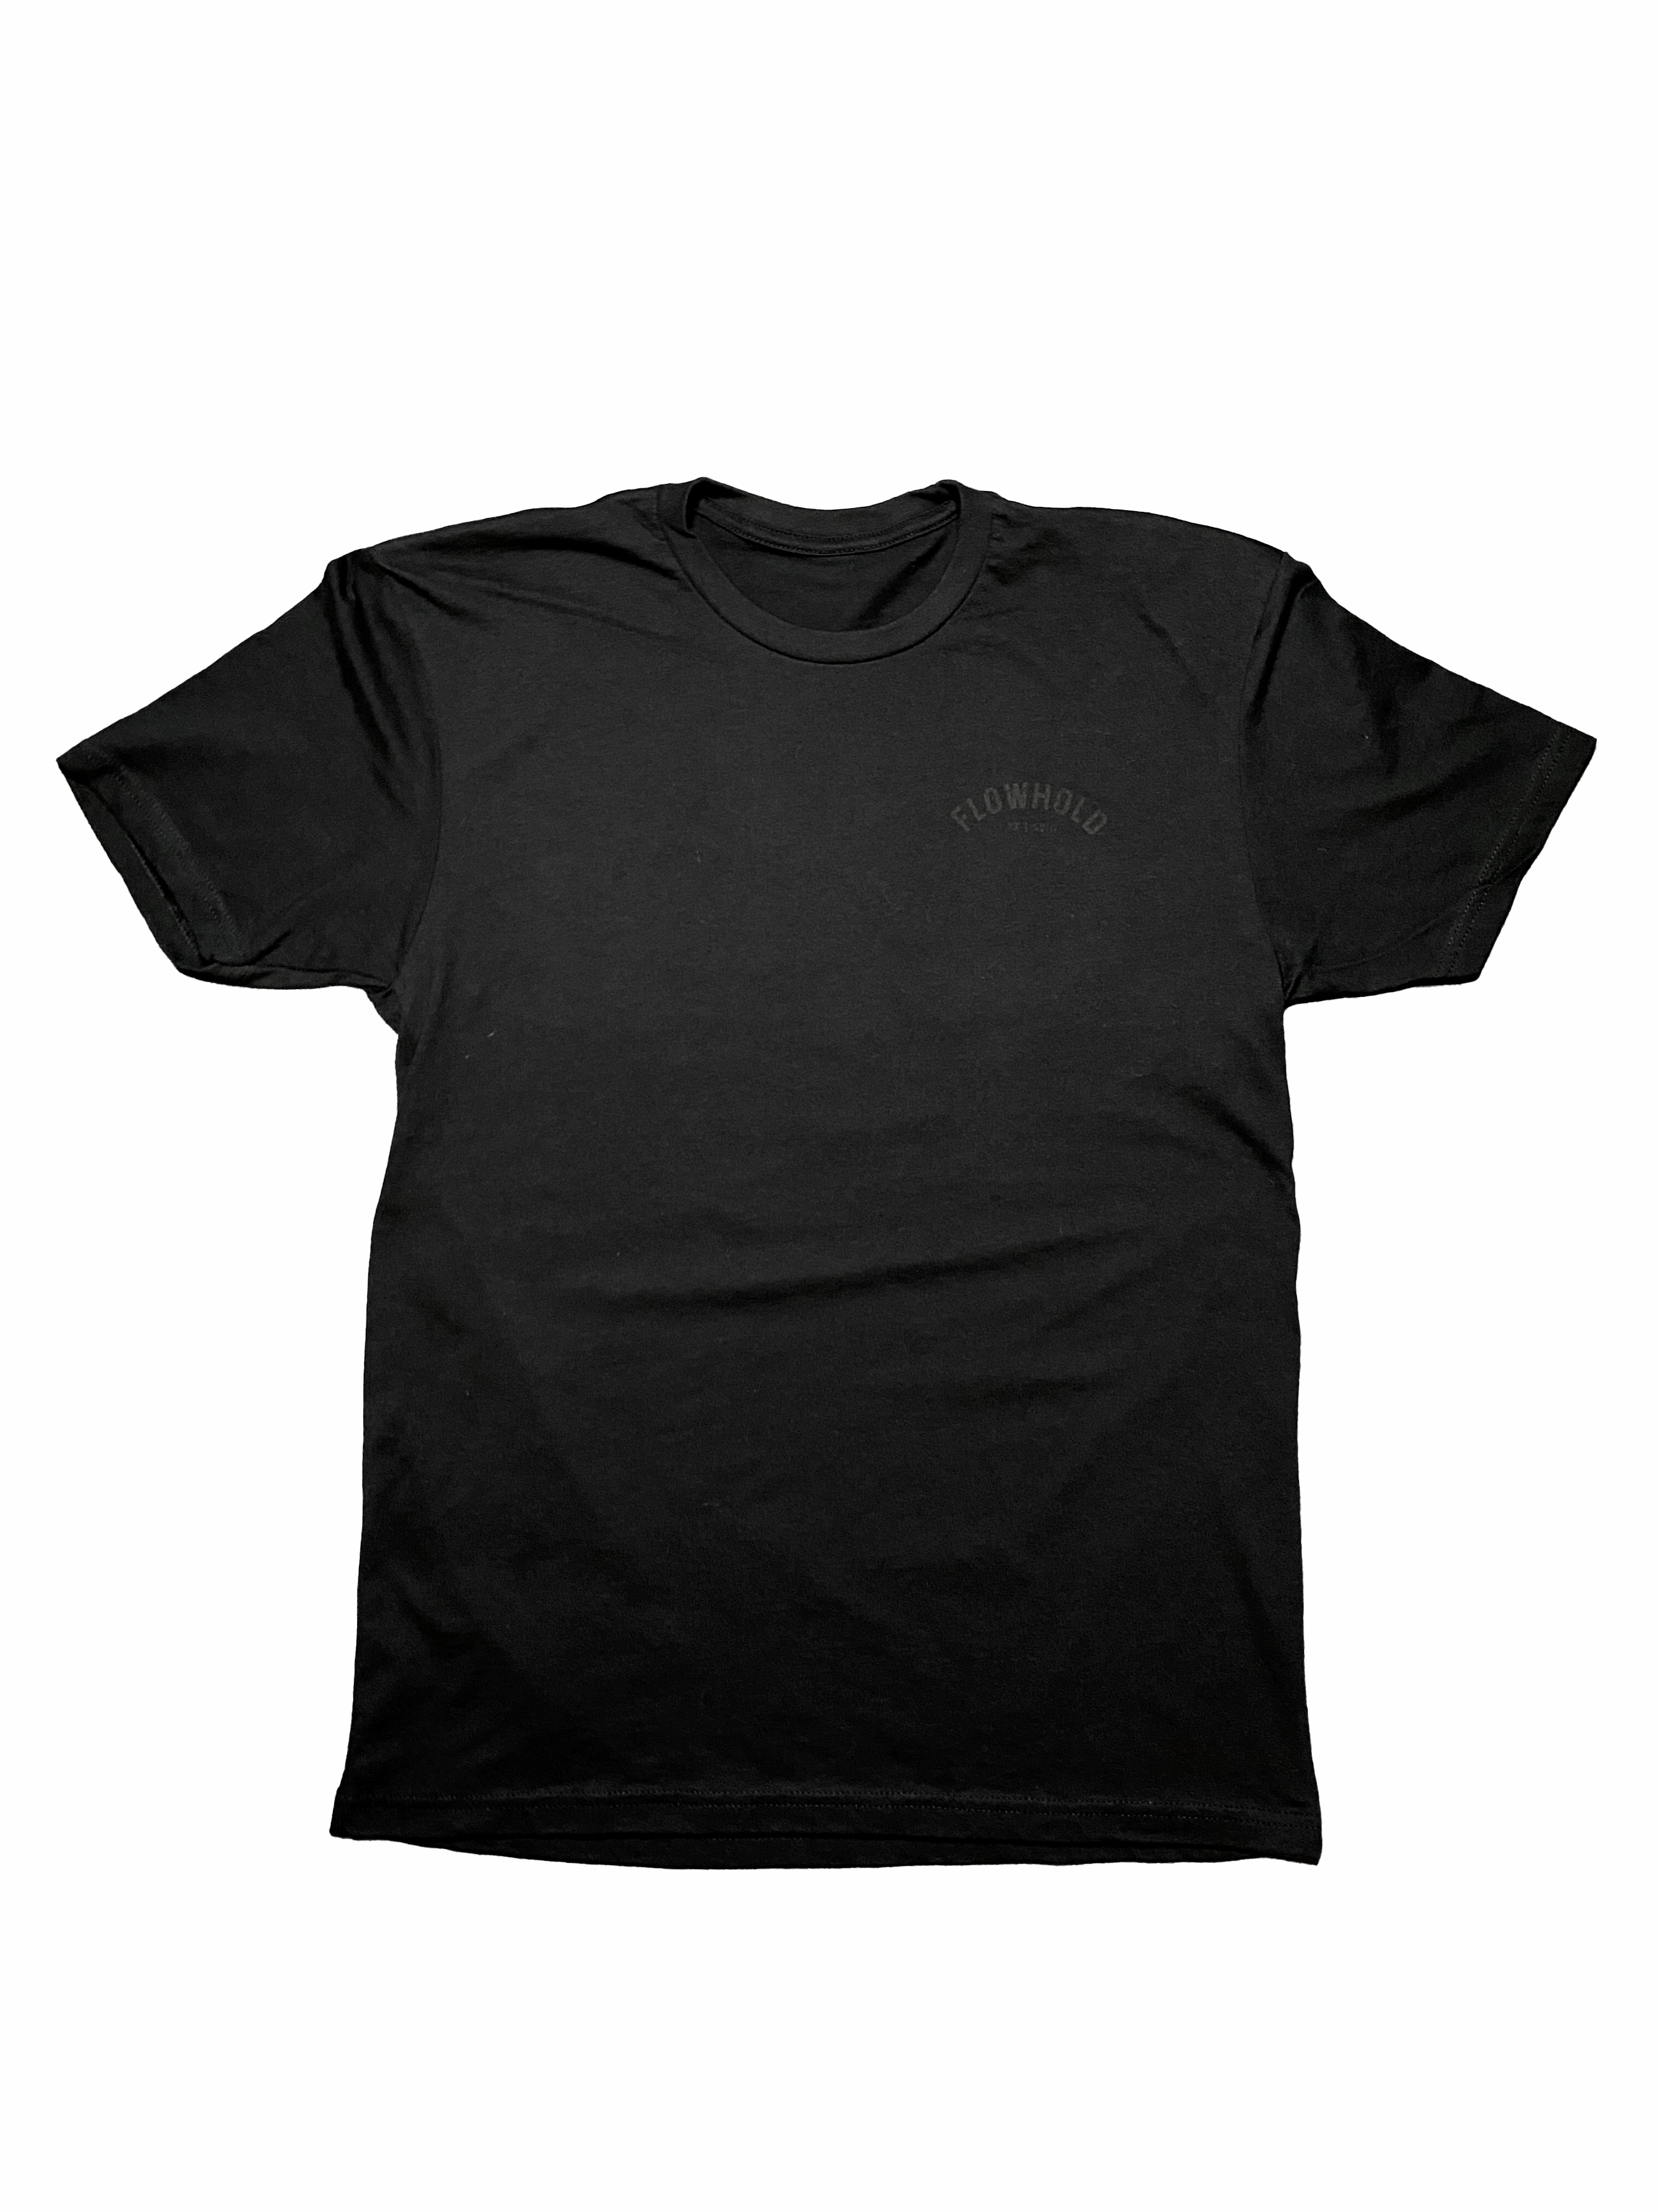 Flowhold T-Shirt (Blacked-Out) V2